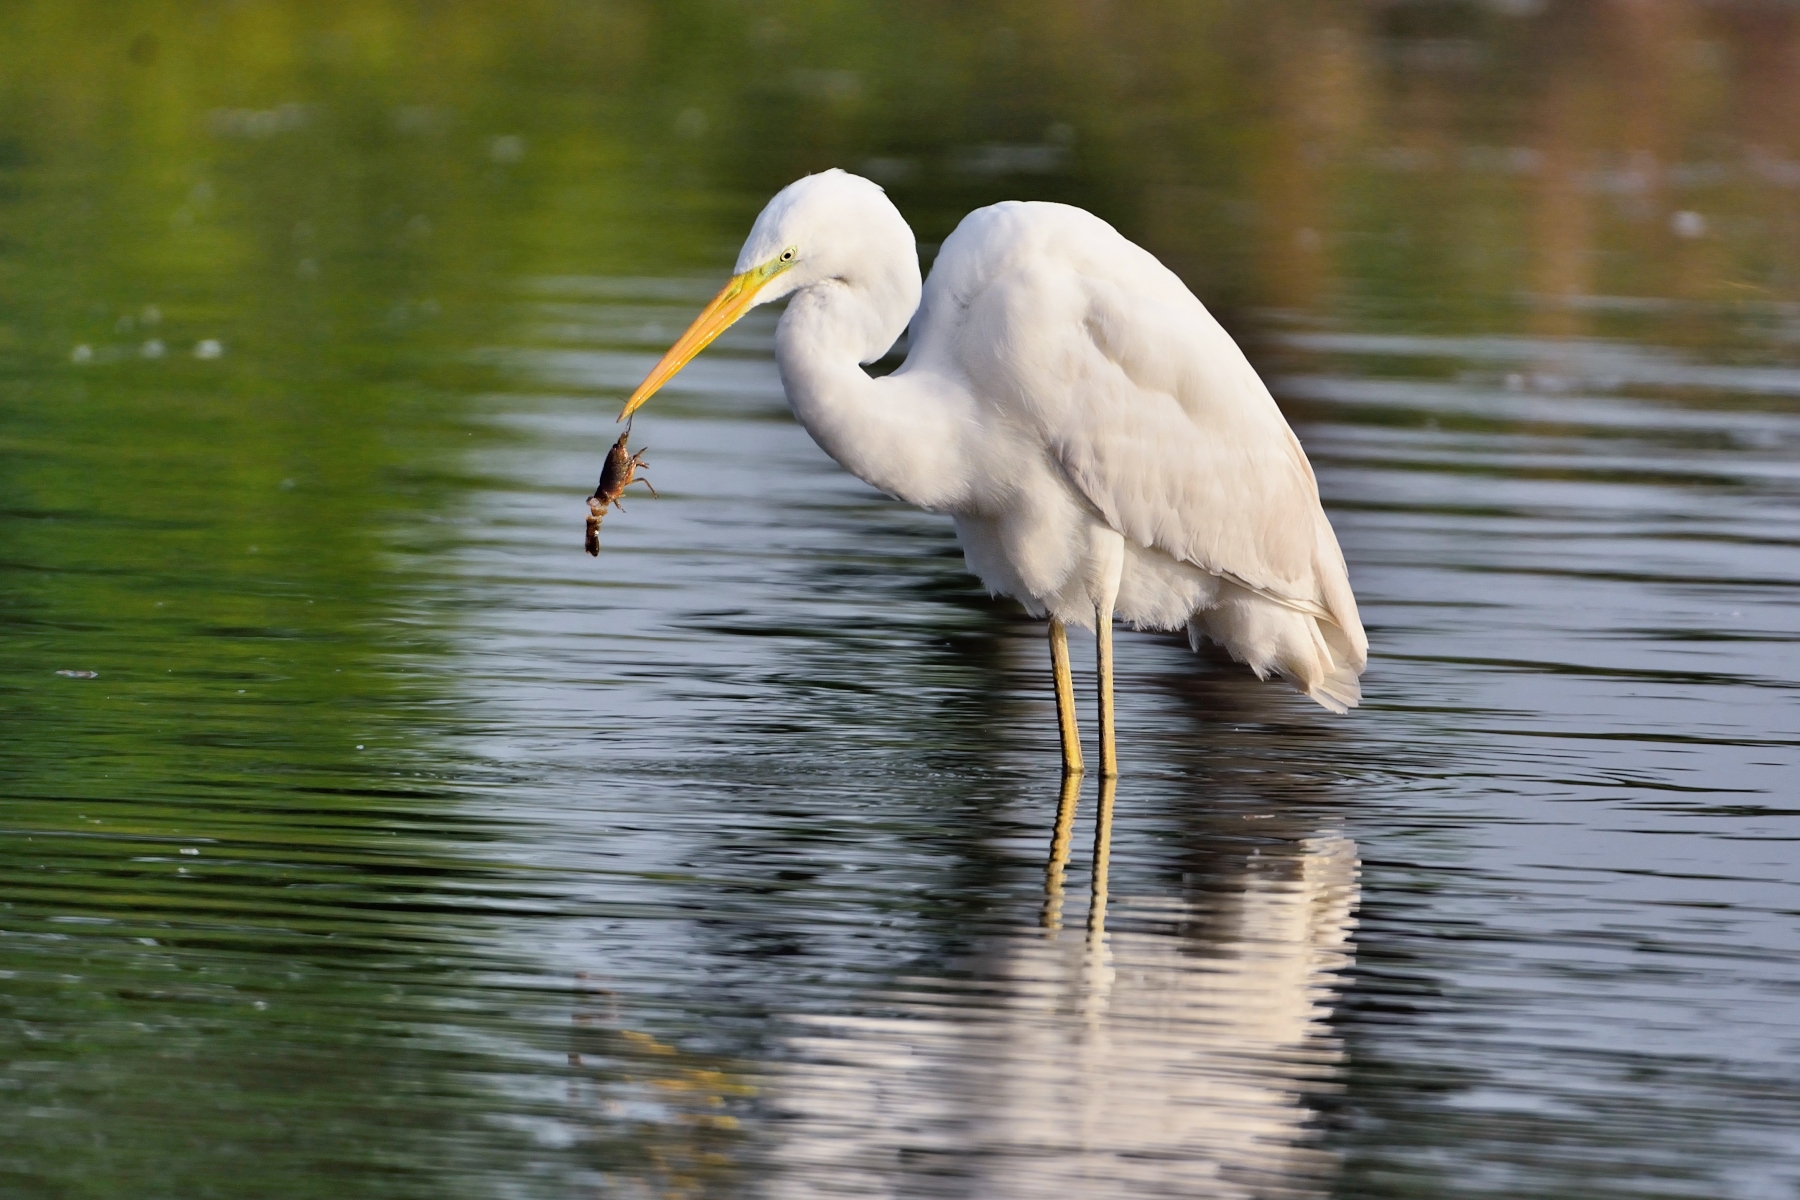 The White Heron has a weakness for prawns .....